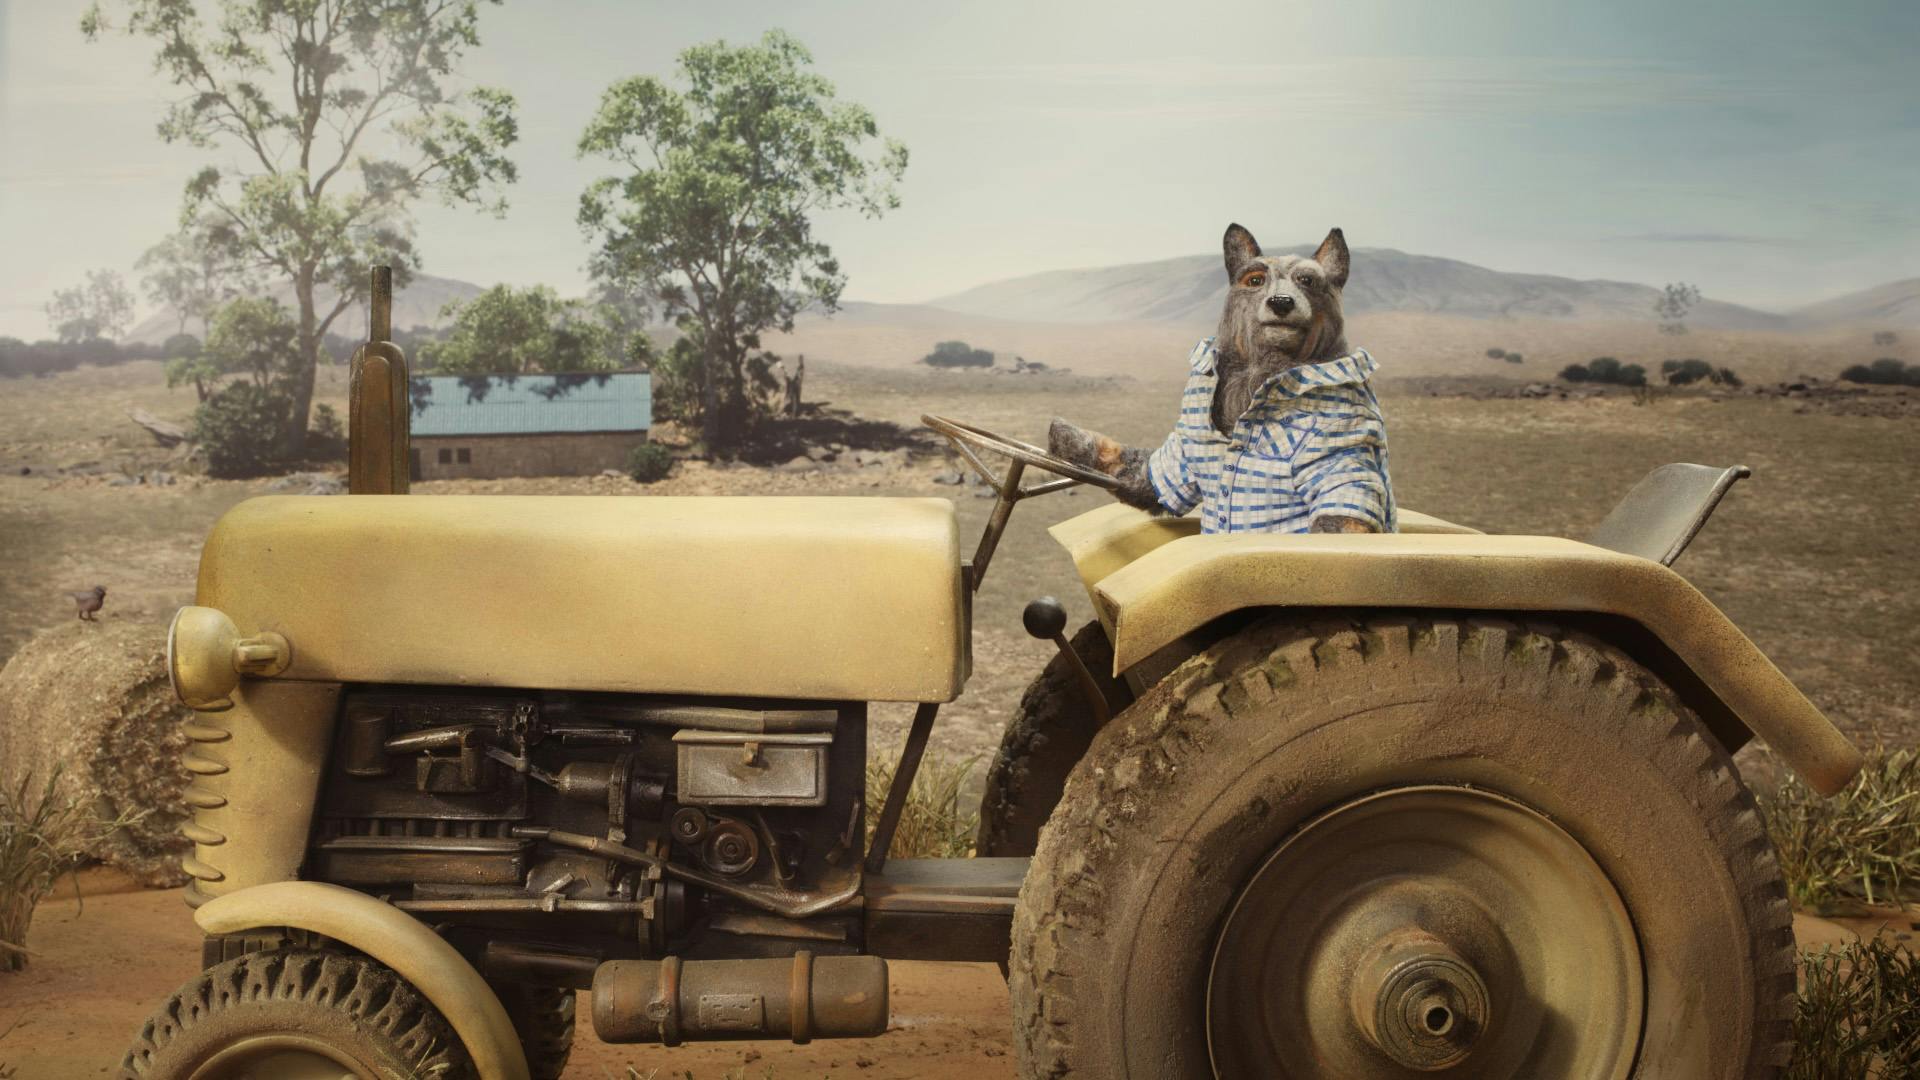 A grey puppet of a creature sitting on a tractor against a model of an Australian landscape